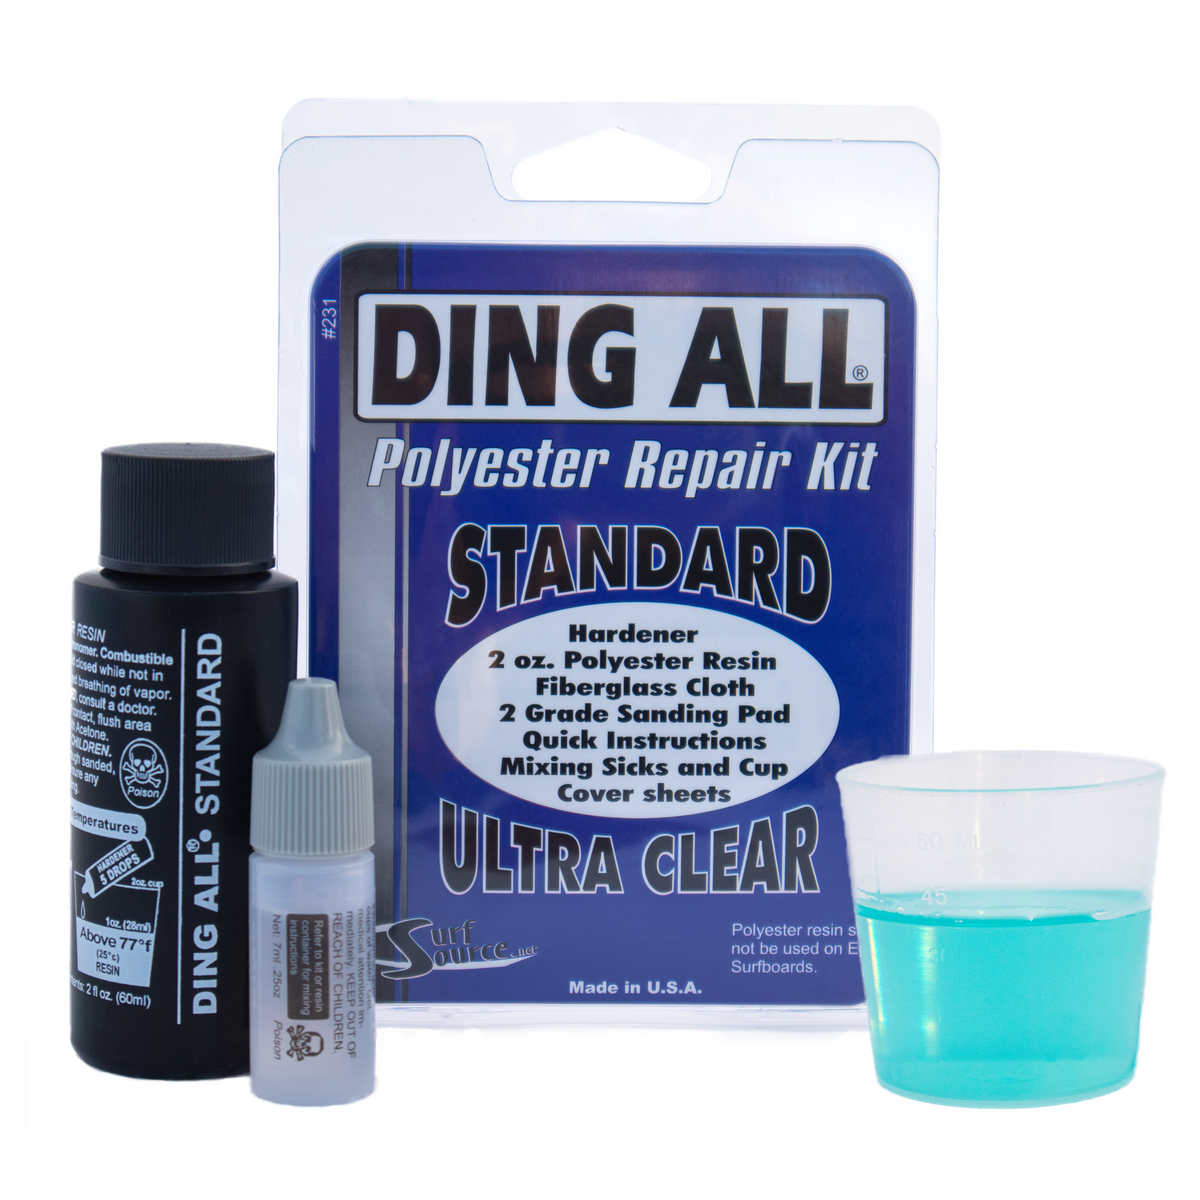 Ding All DAS010 Sun Cure Repair Kit Polyester Yellow Label 2 oz